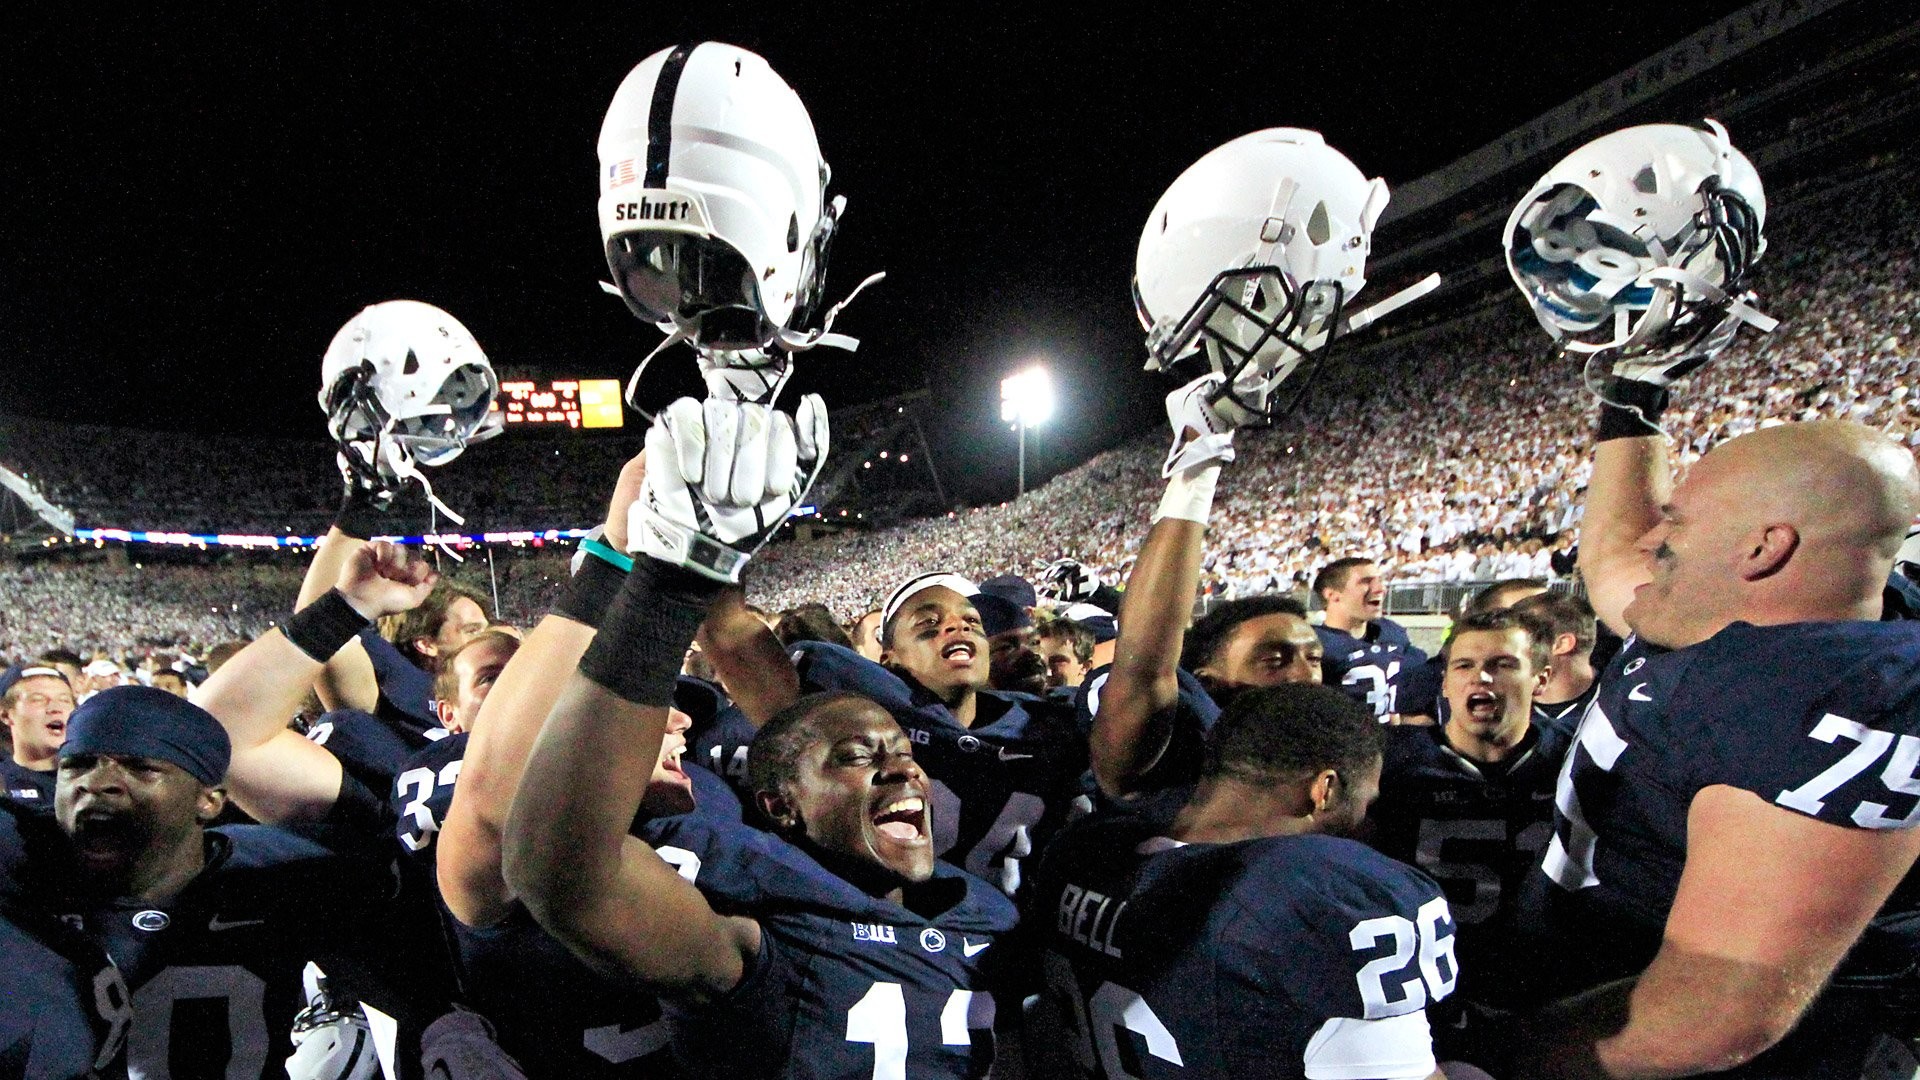 1920x1080 PENN STATE NITTANY LIONS college football wallpaper |  | 595756 |  WallpaperUP